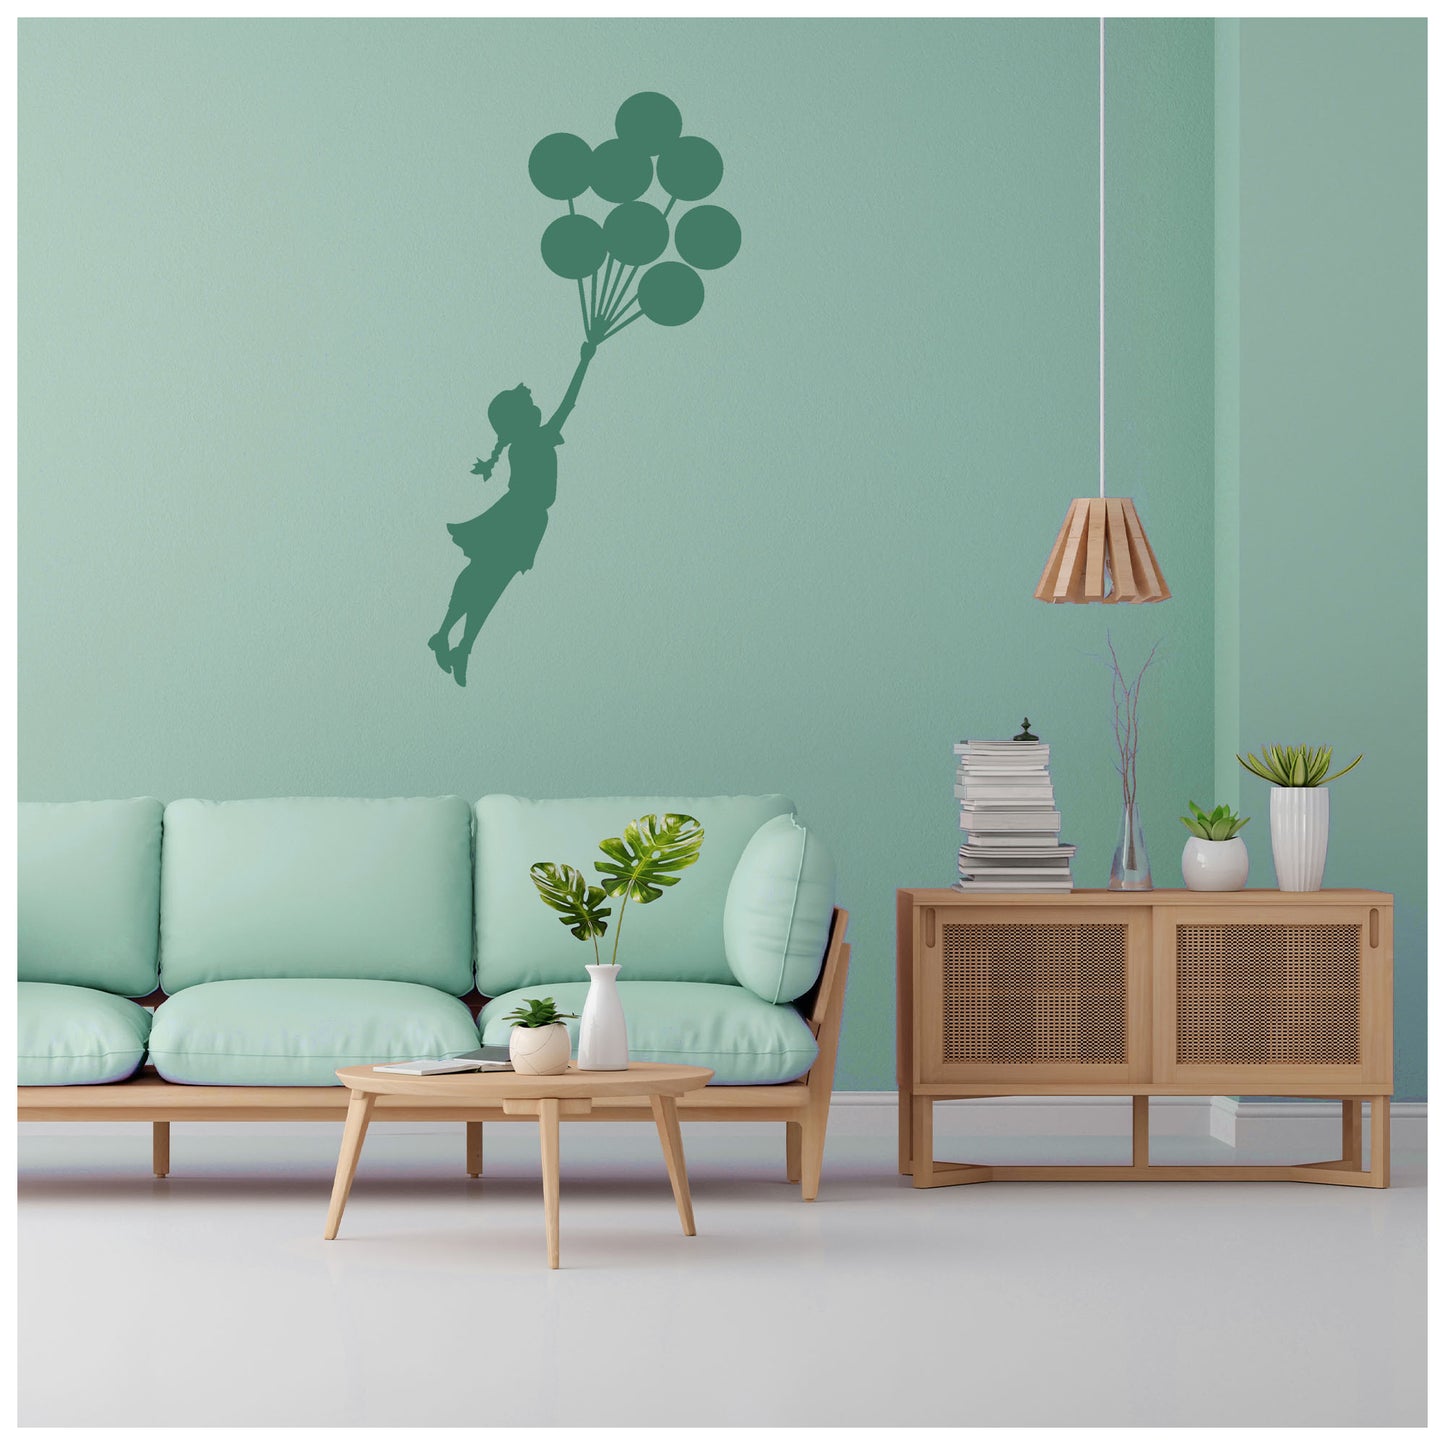 Flying Girl with Baloon Wall Design Stencil (KHS423)